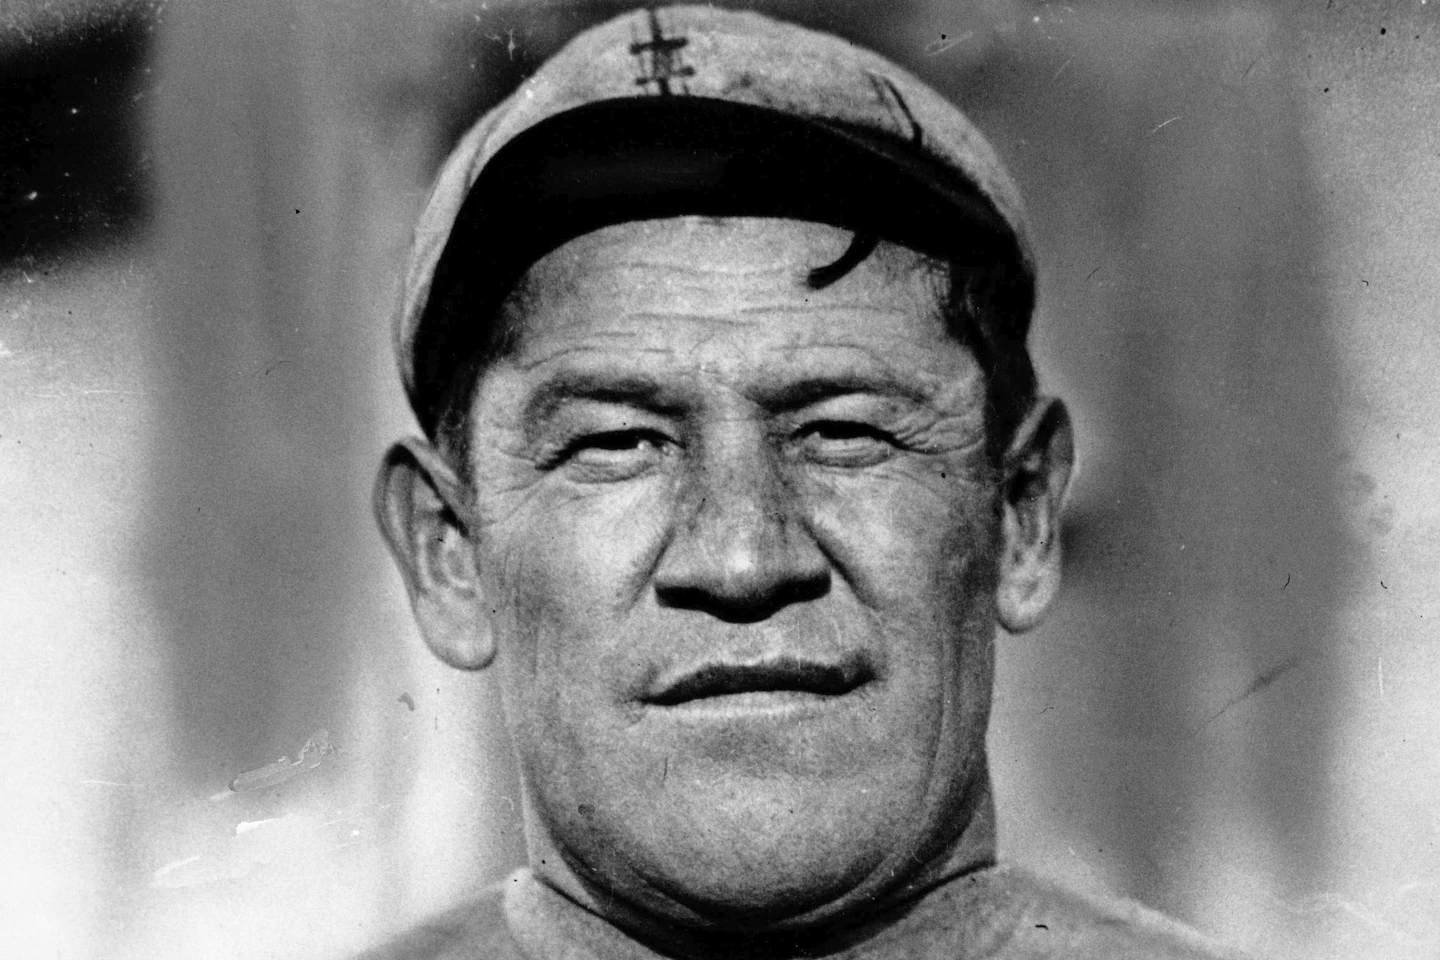 IOC reinstates Jim Thorpe as sole winner of two golds from 1912 Olympics